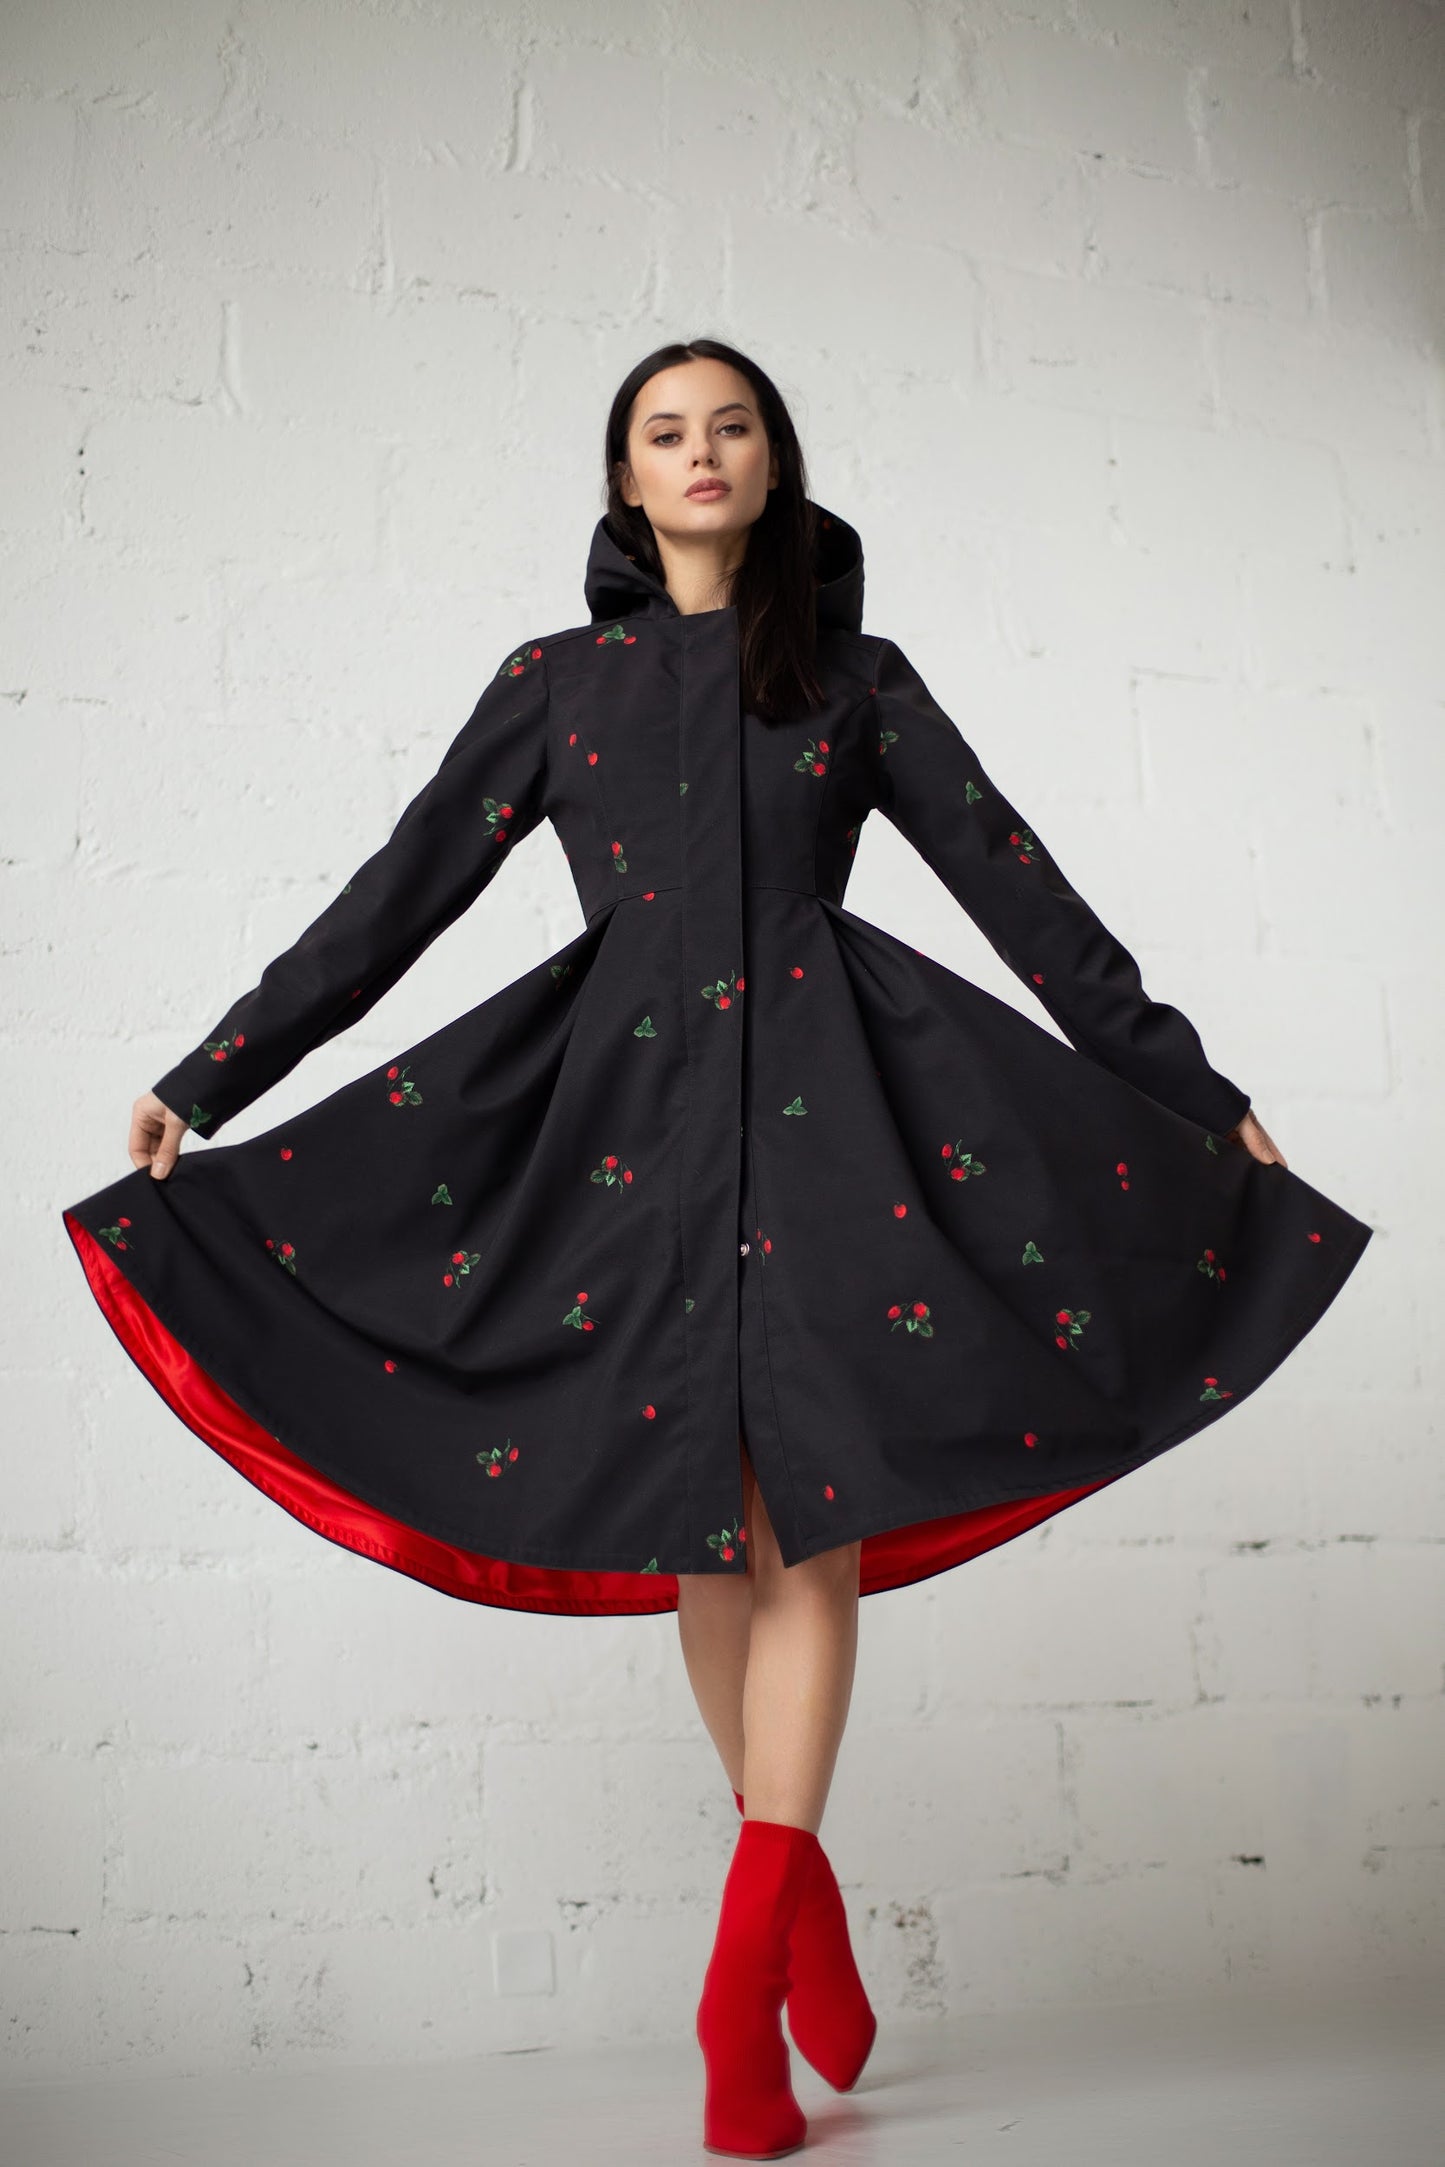 Black and red waterproof coat with red lining